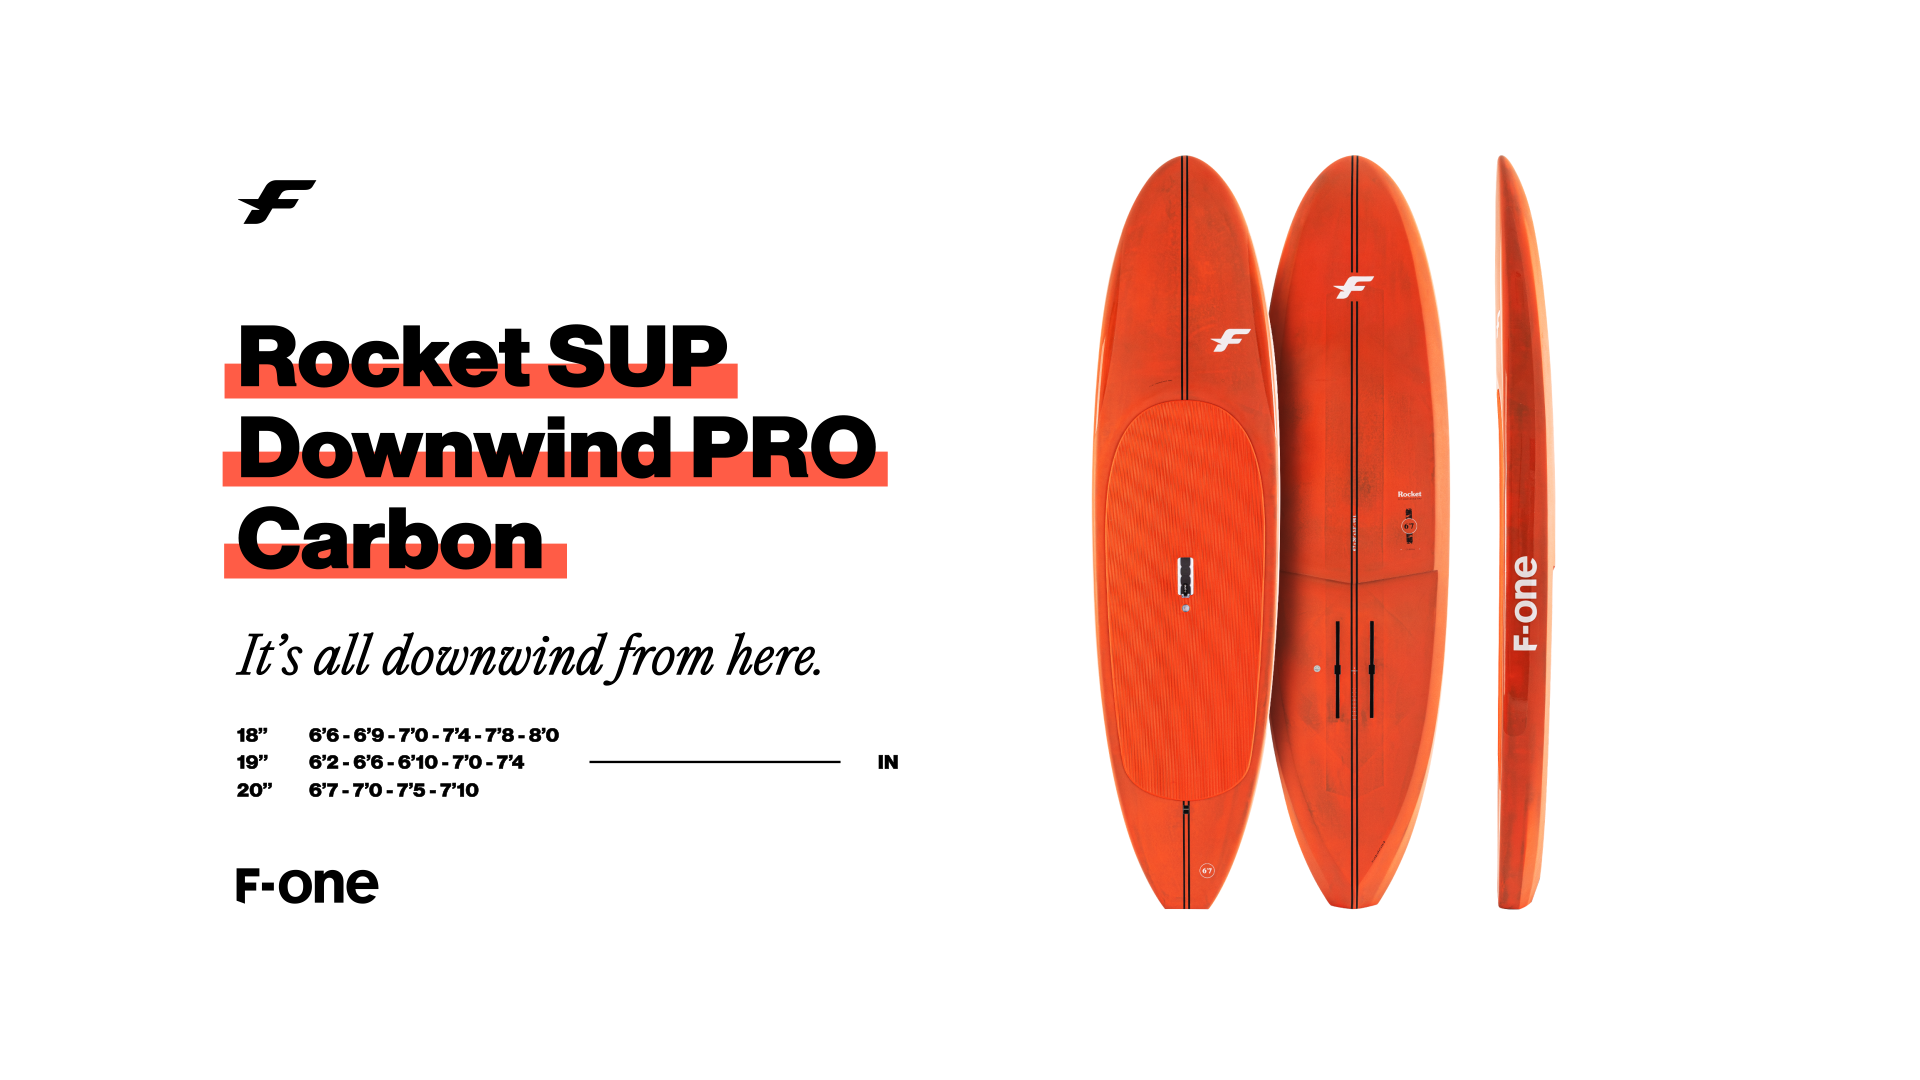 The ROCKET SUP DW PRO is out 16